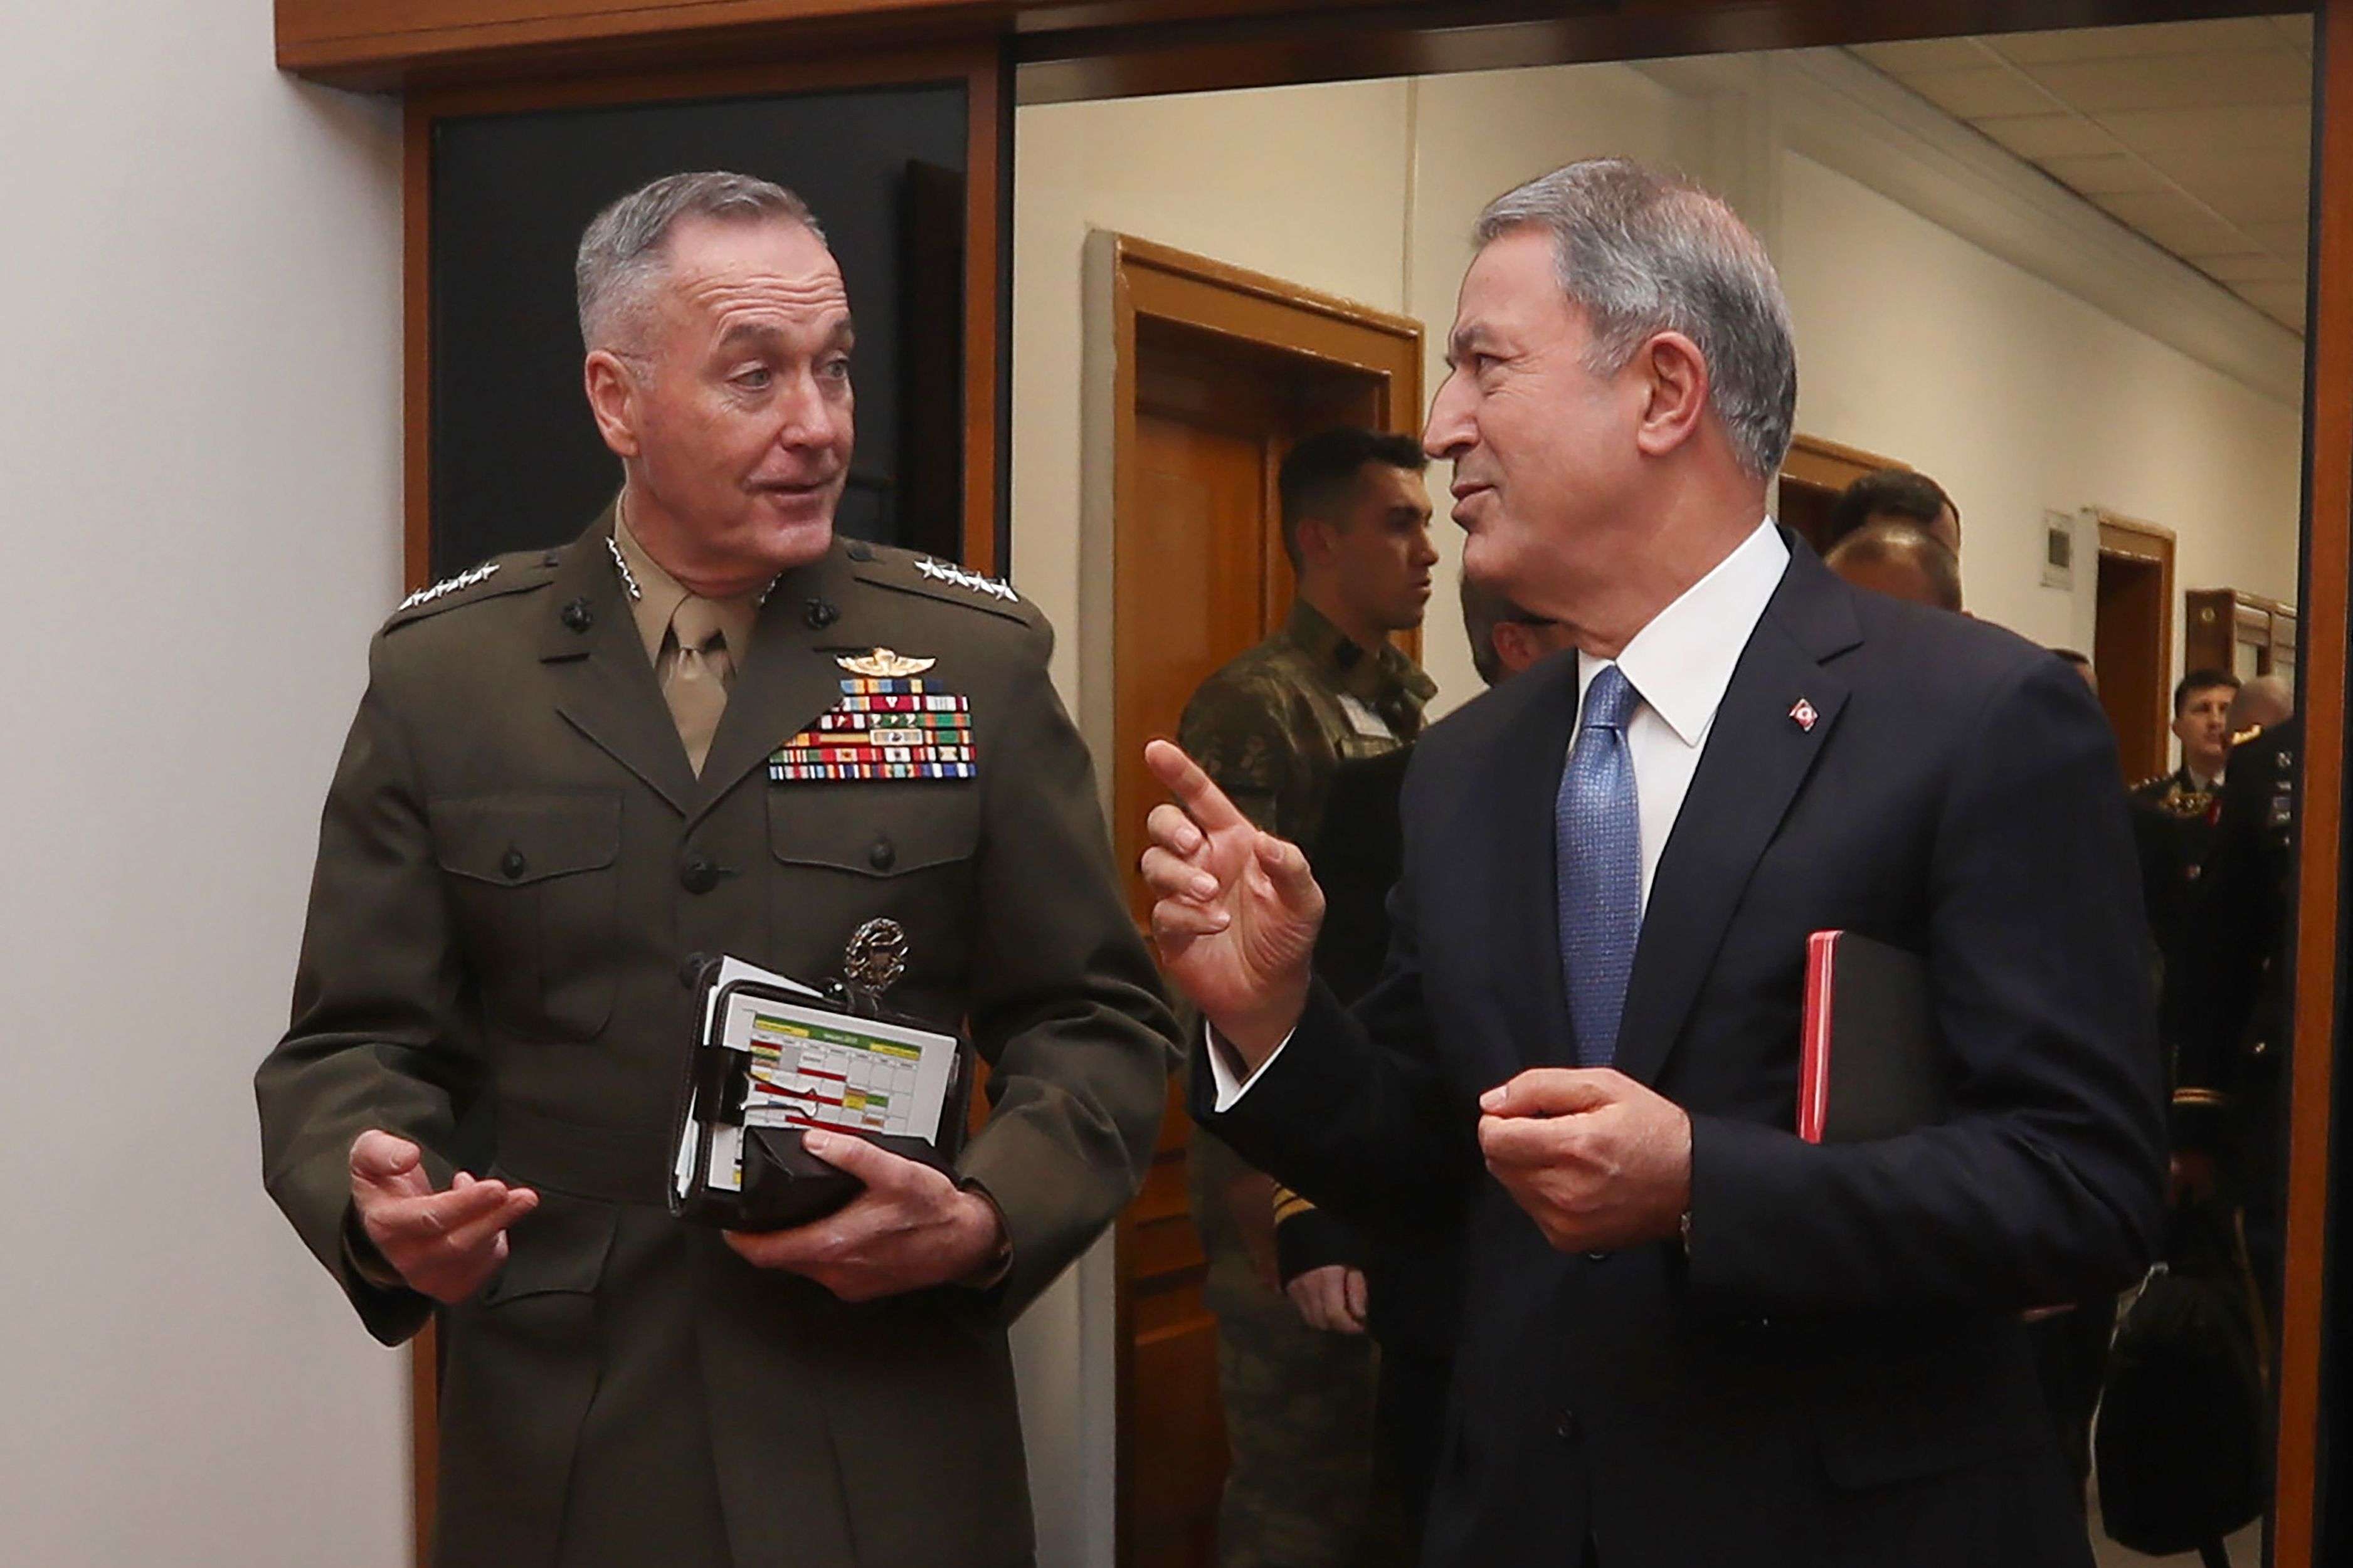 Turkish Defence Minister Hulusi Akar (R) and US Chairman of the Joint Chiefs of Staff Joseph Dunford speak during a meeting in Ankara on January 8, 2019.